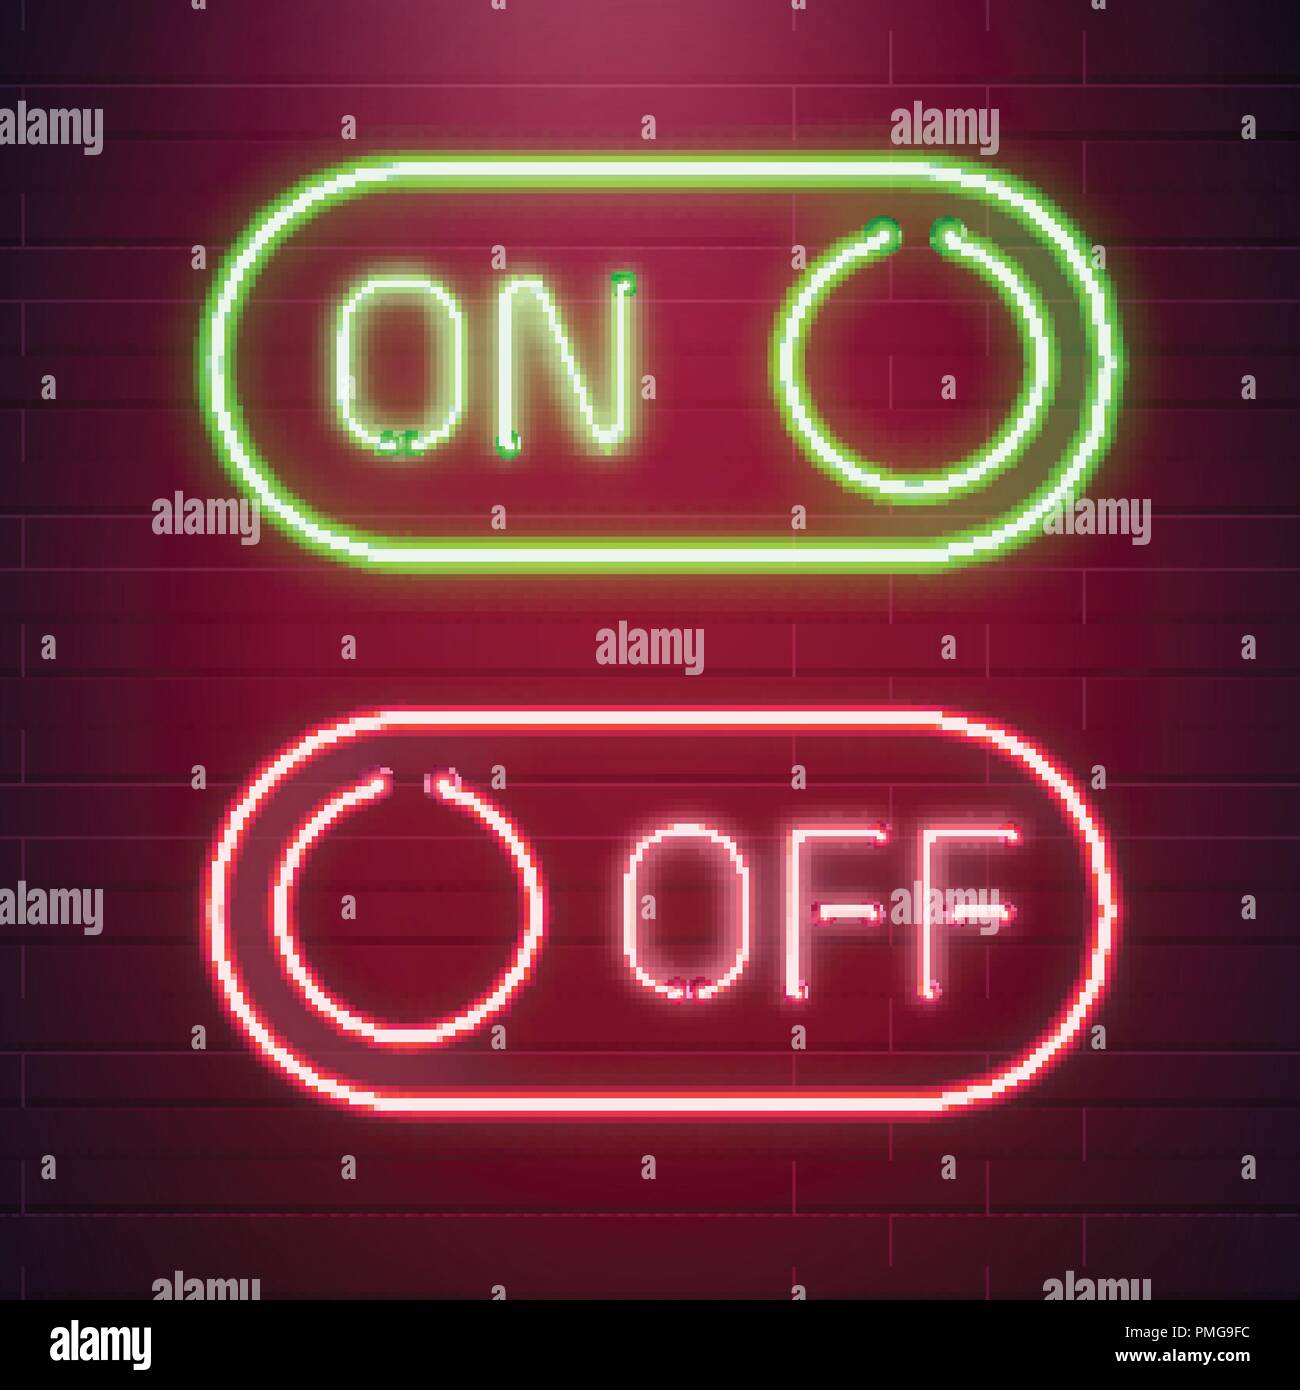 On and Off lamp Neon light Toggle switch button. Vector illustration. Fluorescent light vector illustration Stock Vector